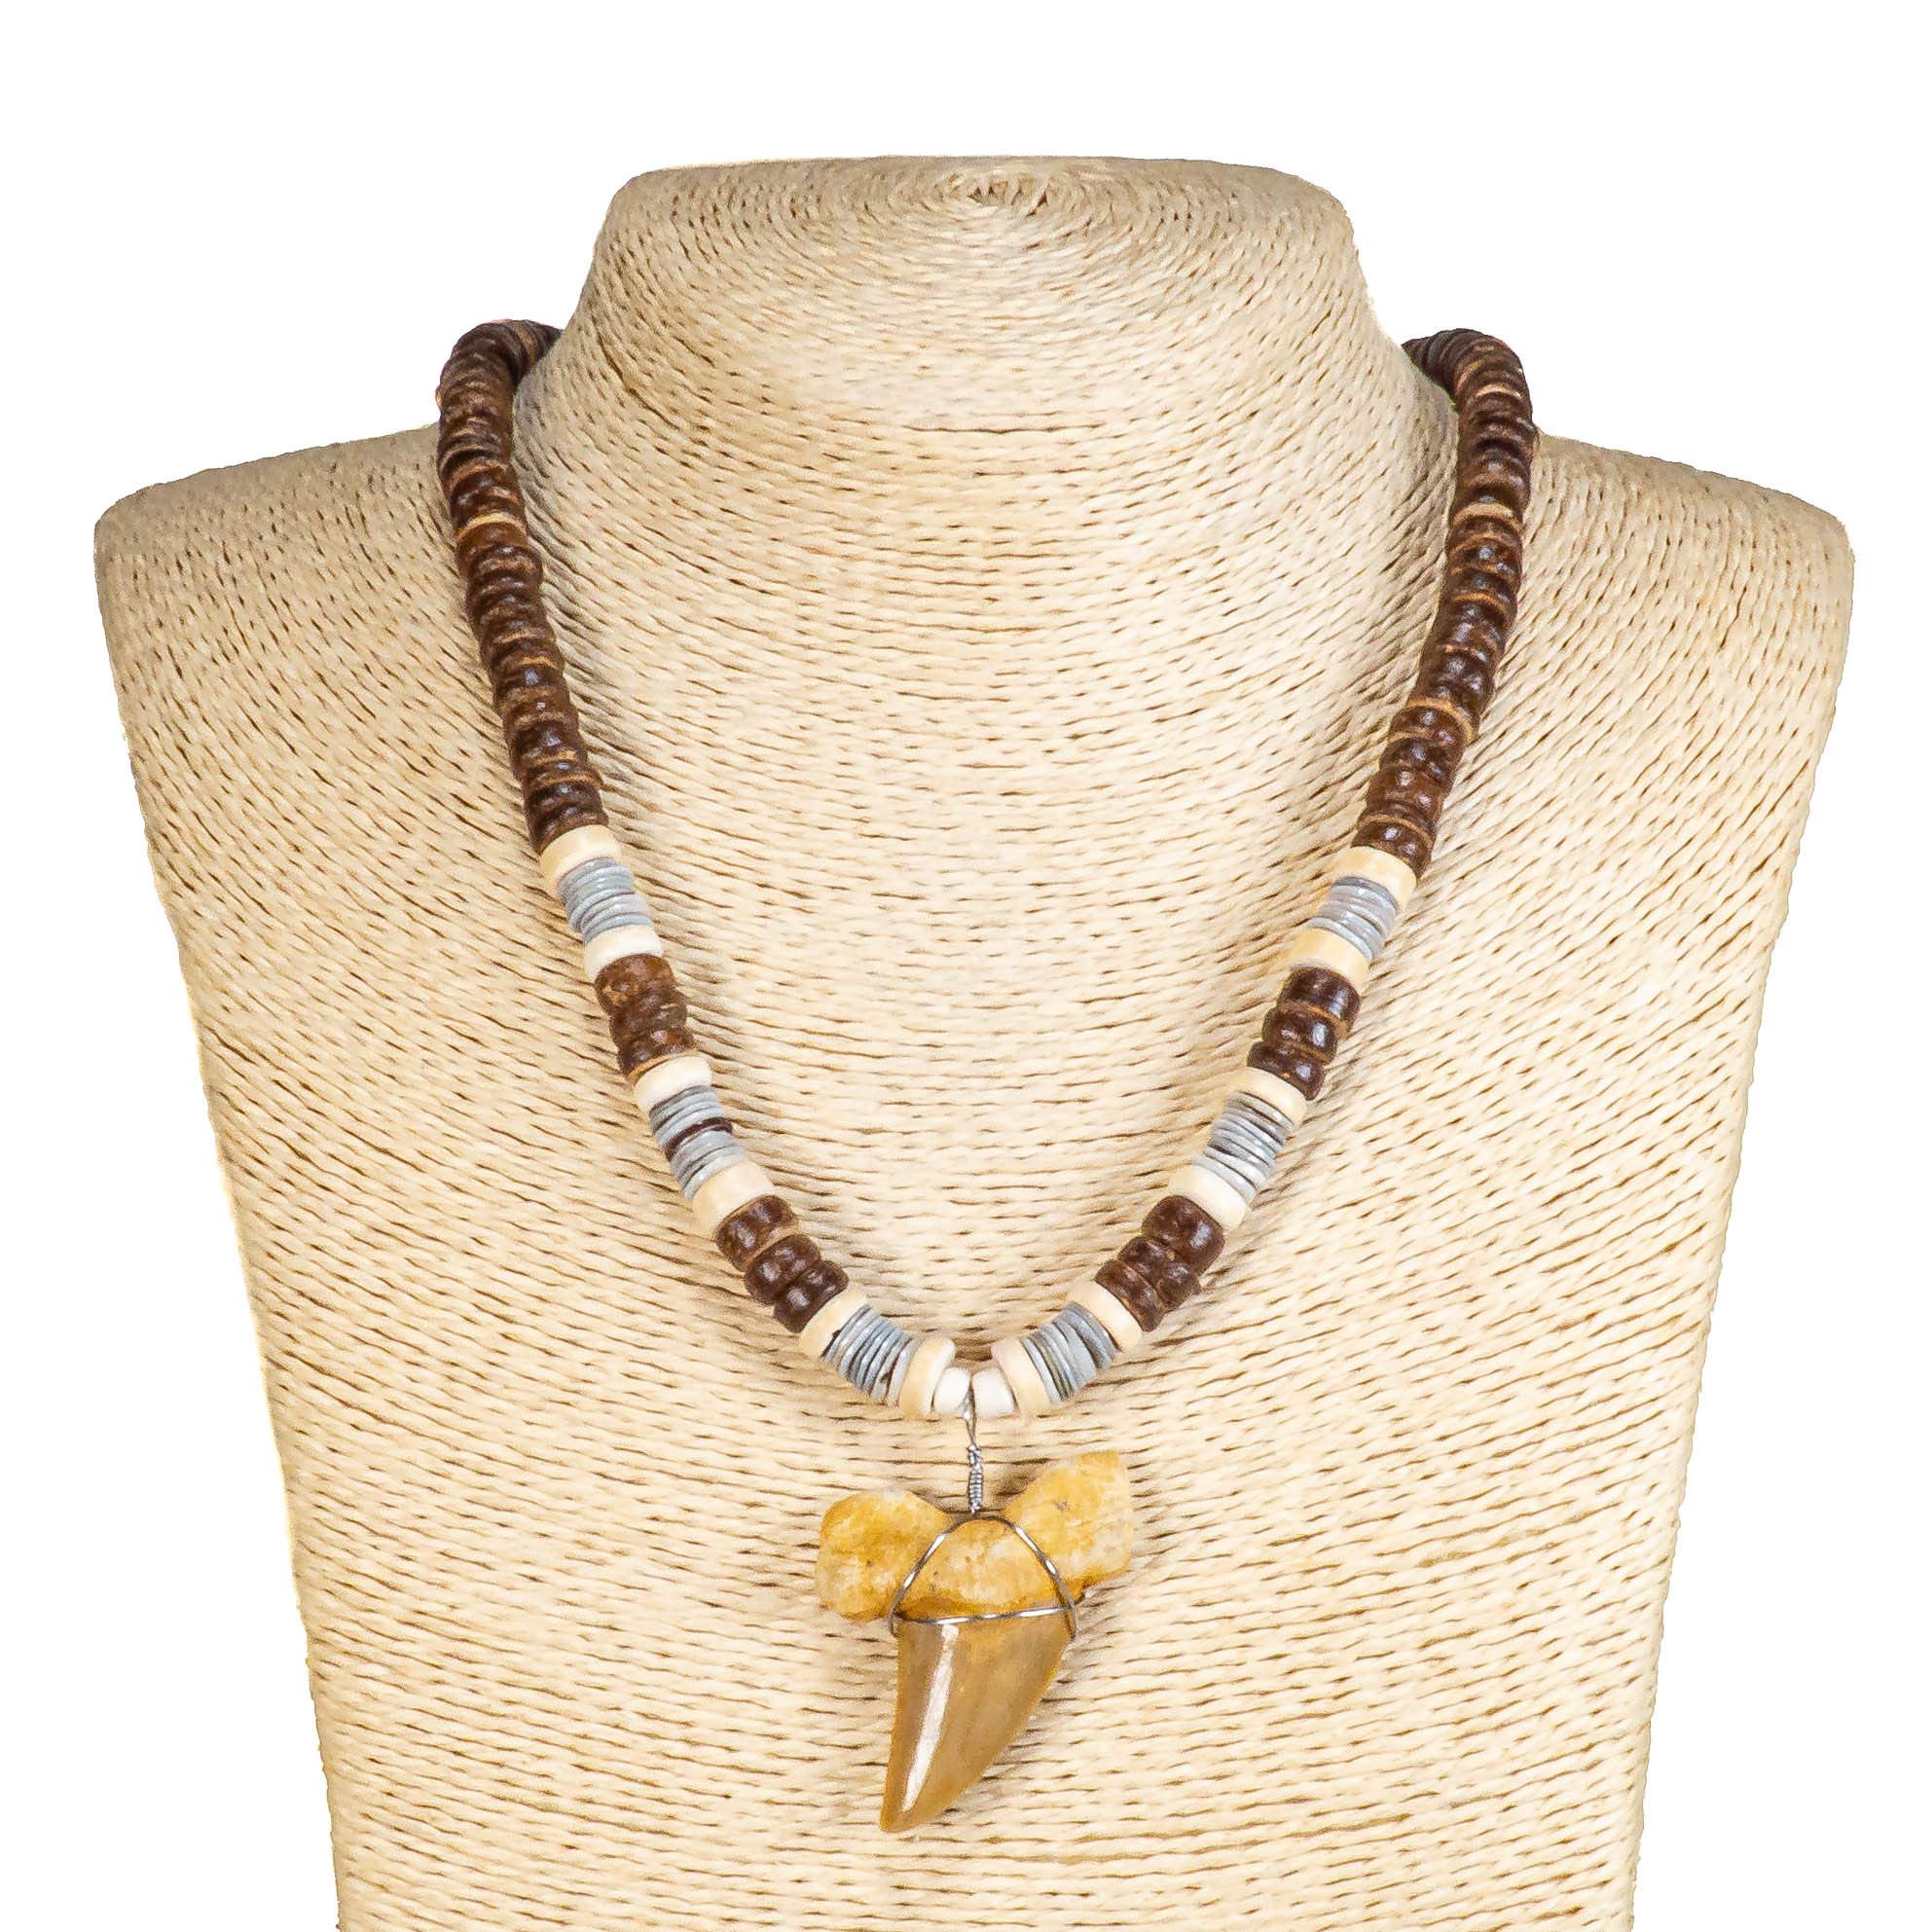 1¼"+ Shark Tooth Pendant on Brown Coconut and Oyster Shell Beads Necklace